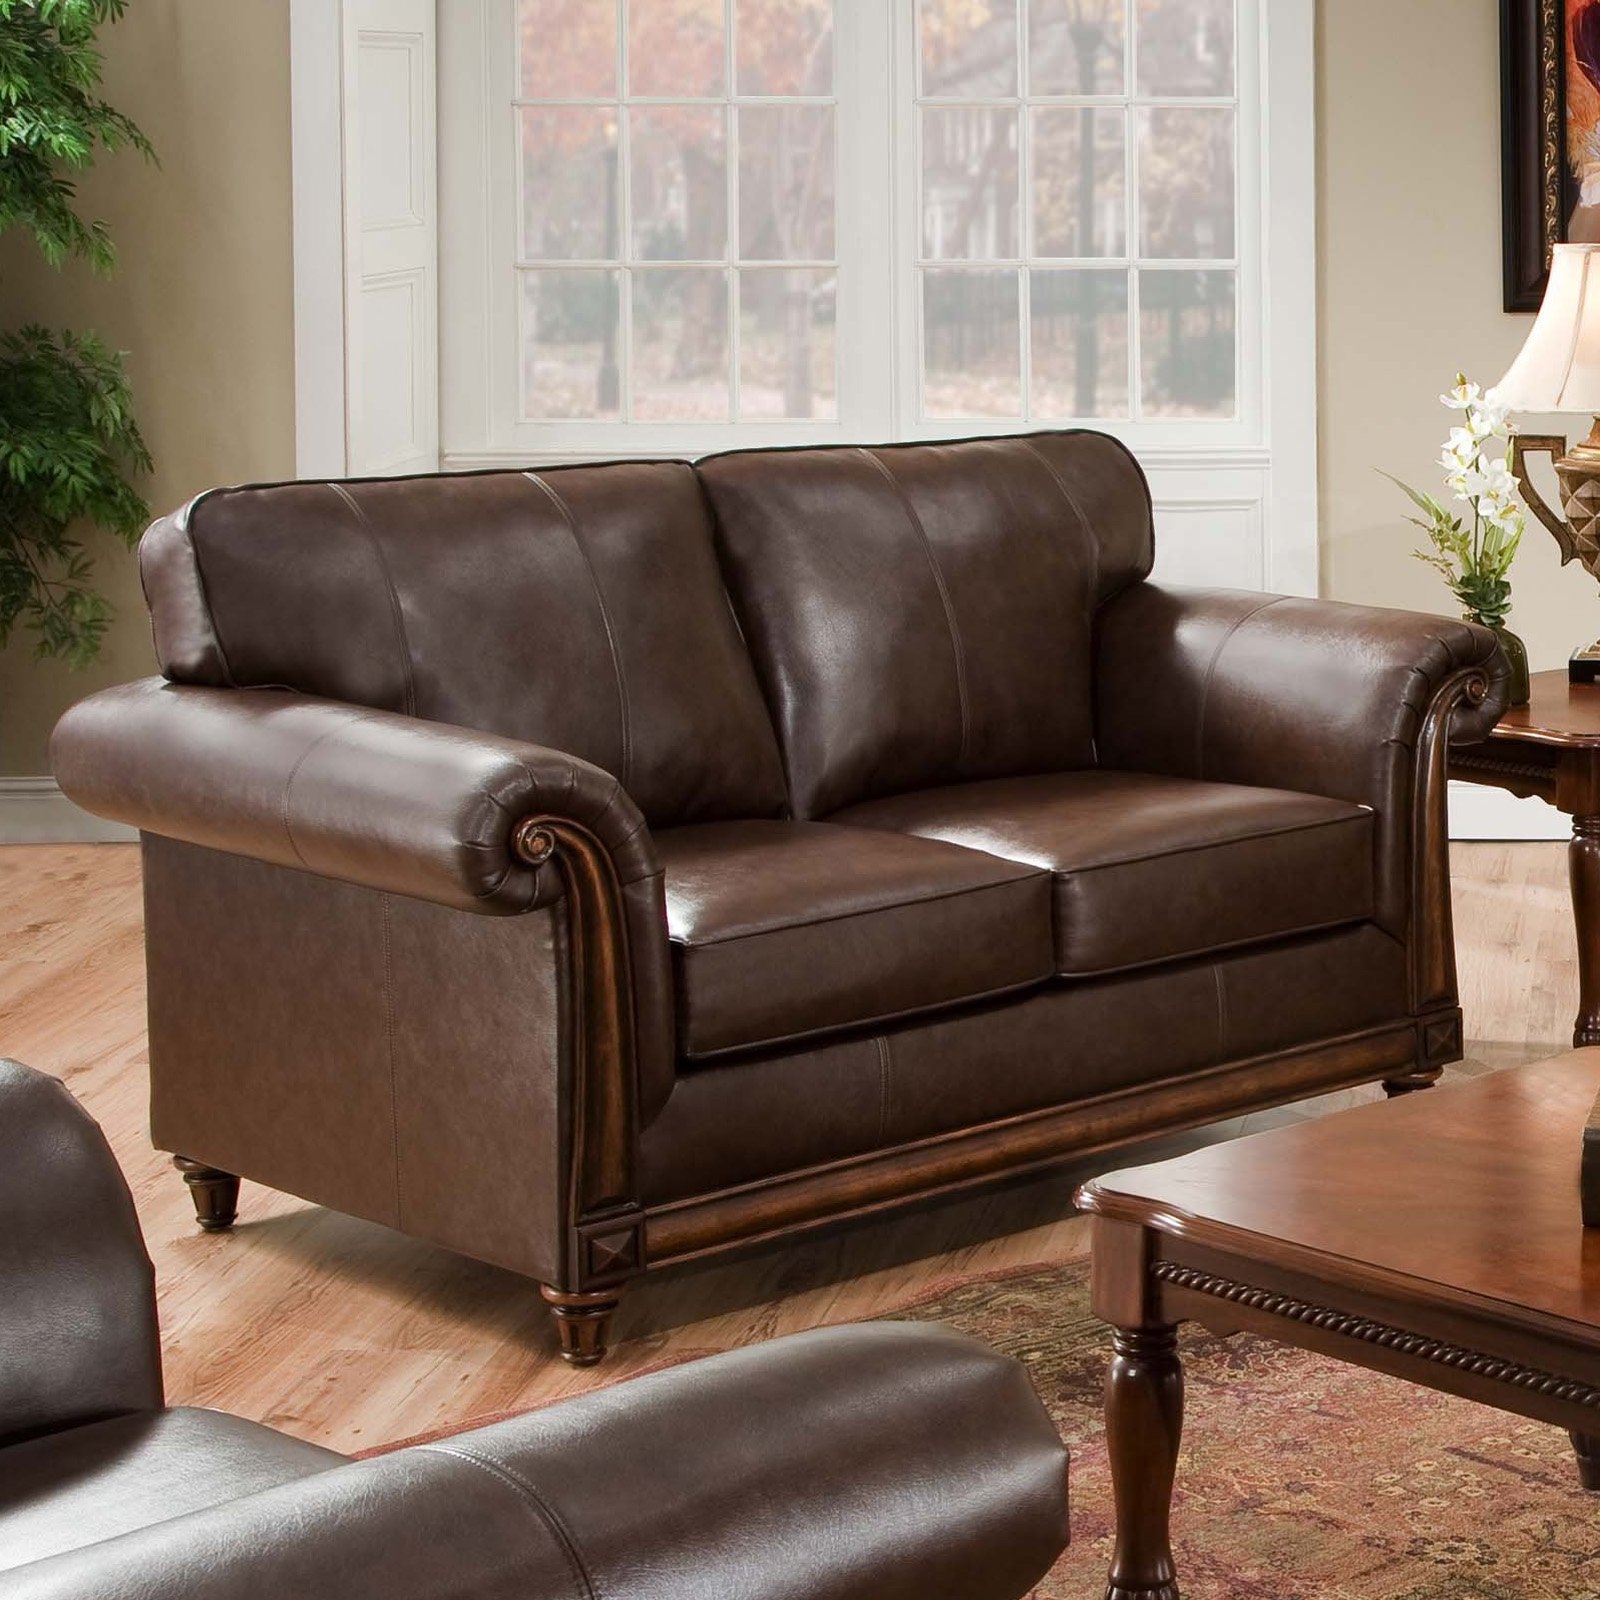 Simmons leather sofa and loveseat 2